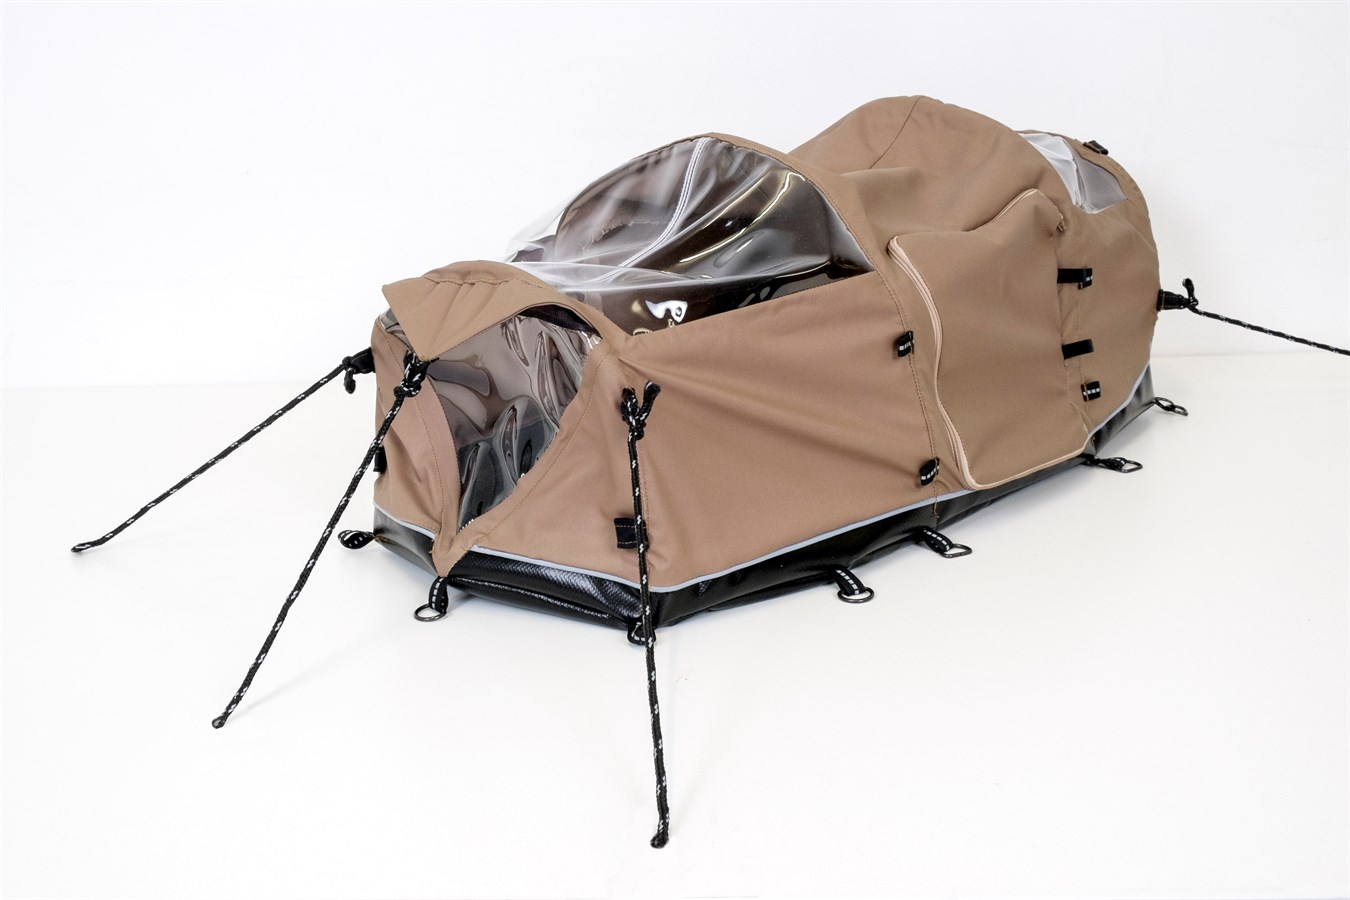 XC90 Back to Nature - design prototype in collaboration with London College of Fashion, UAL